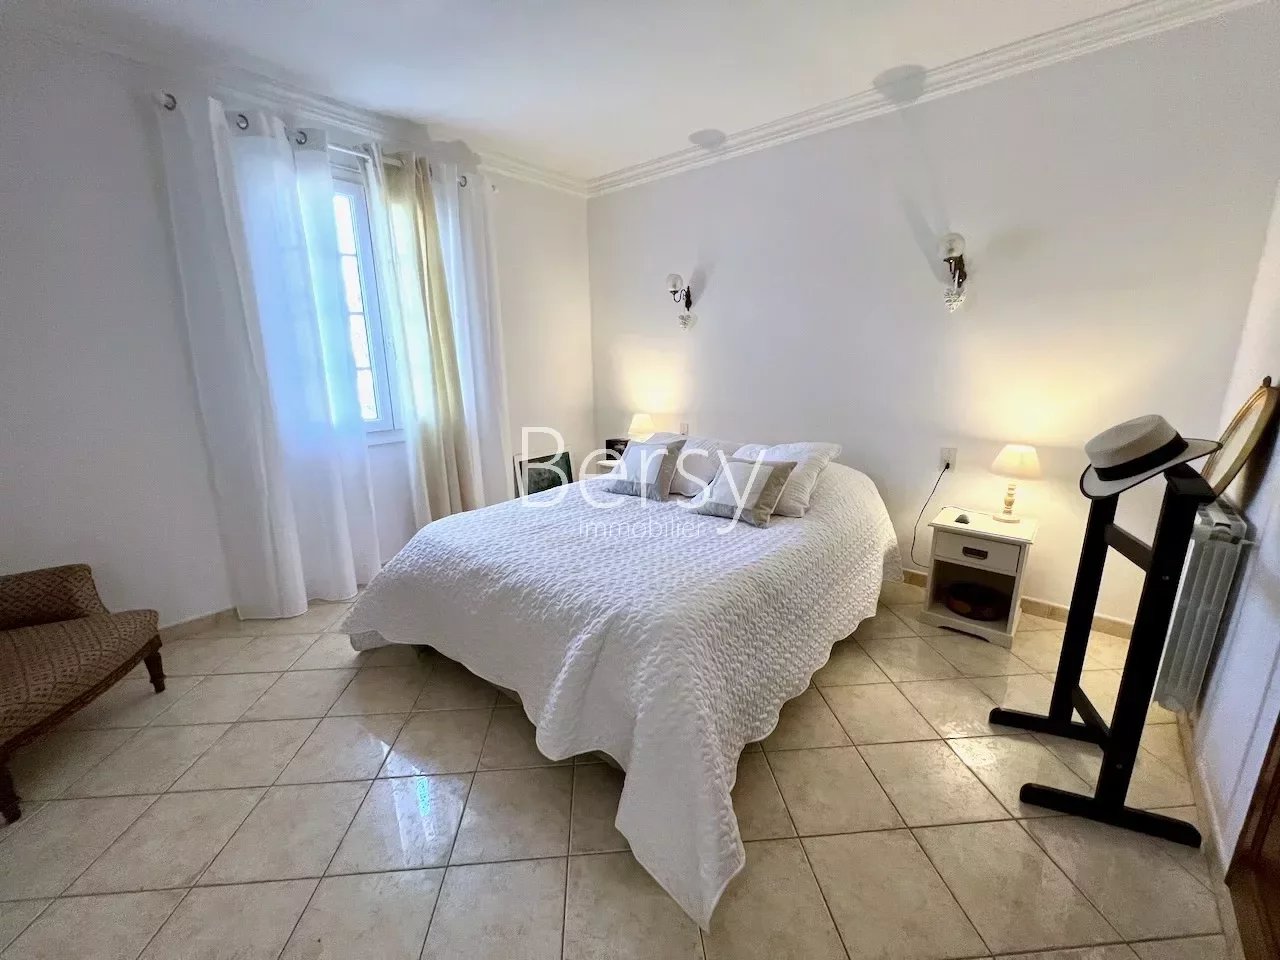 5 minutes from the center - dominant position - Villa 160m2 - 4 bedrooms (including 3 on the ground floor) - living room of 45m2 - 1370m2 of land with swimming pool